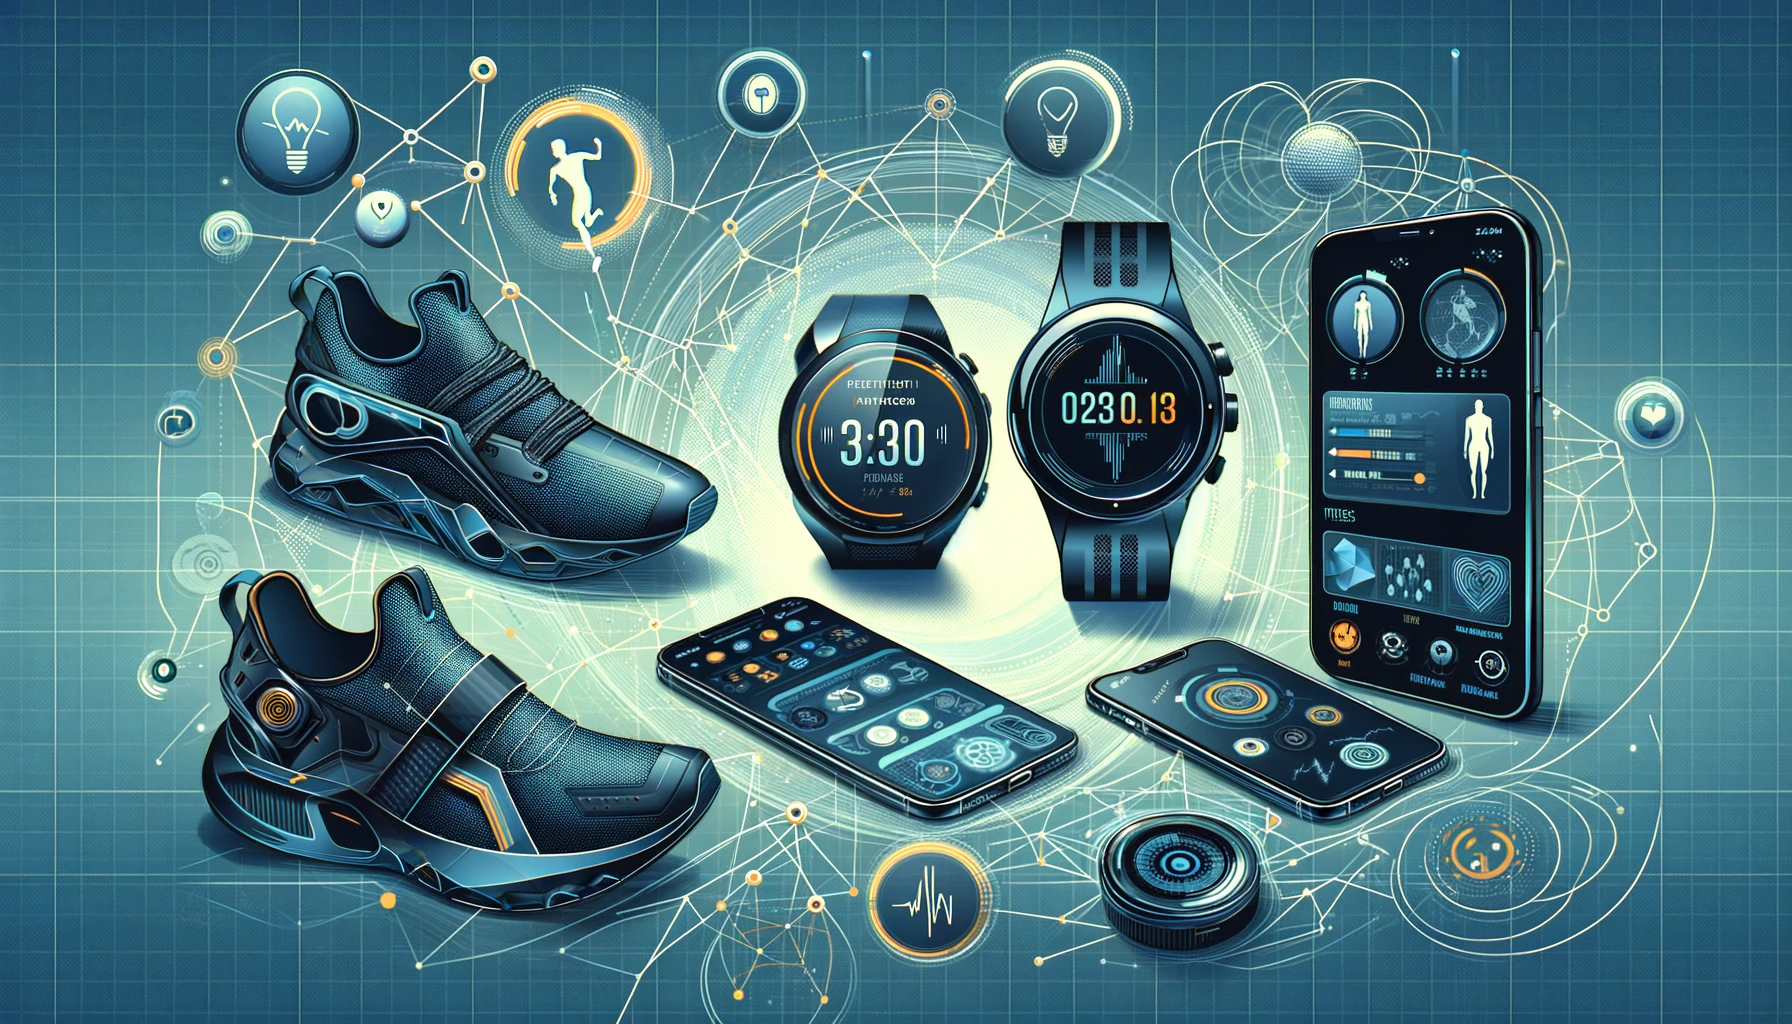 Digital illustration of advanced wearable technology such as smart shoes, smartwatches, and mobile devices, showcasing features for health and fitness monitoring.